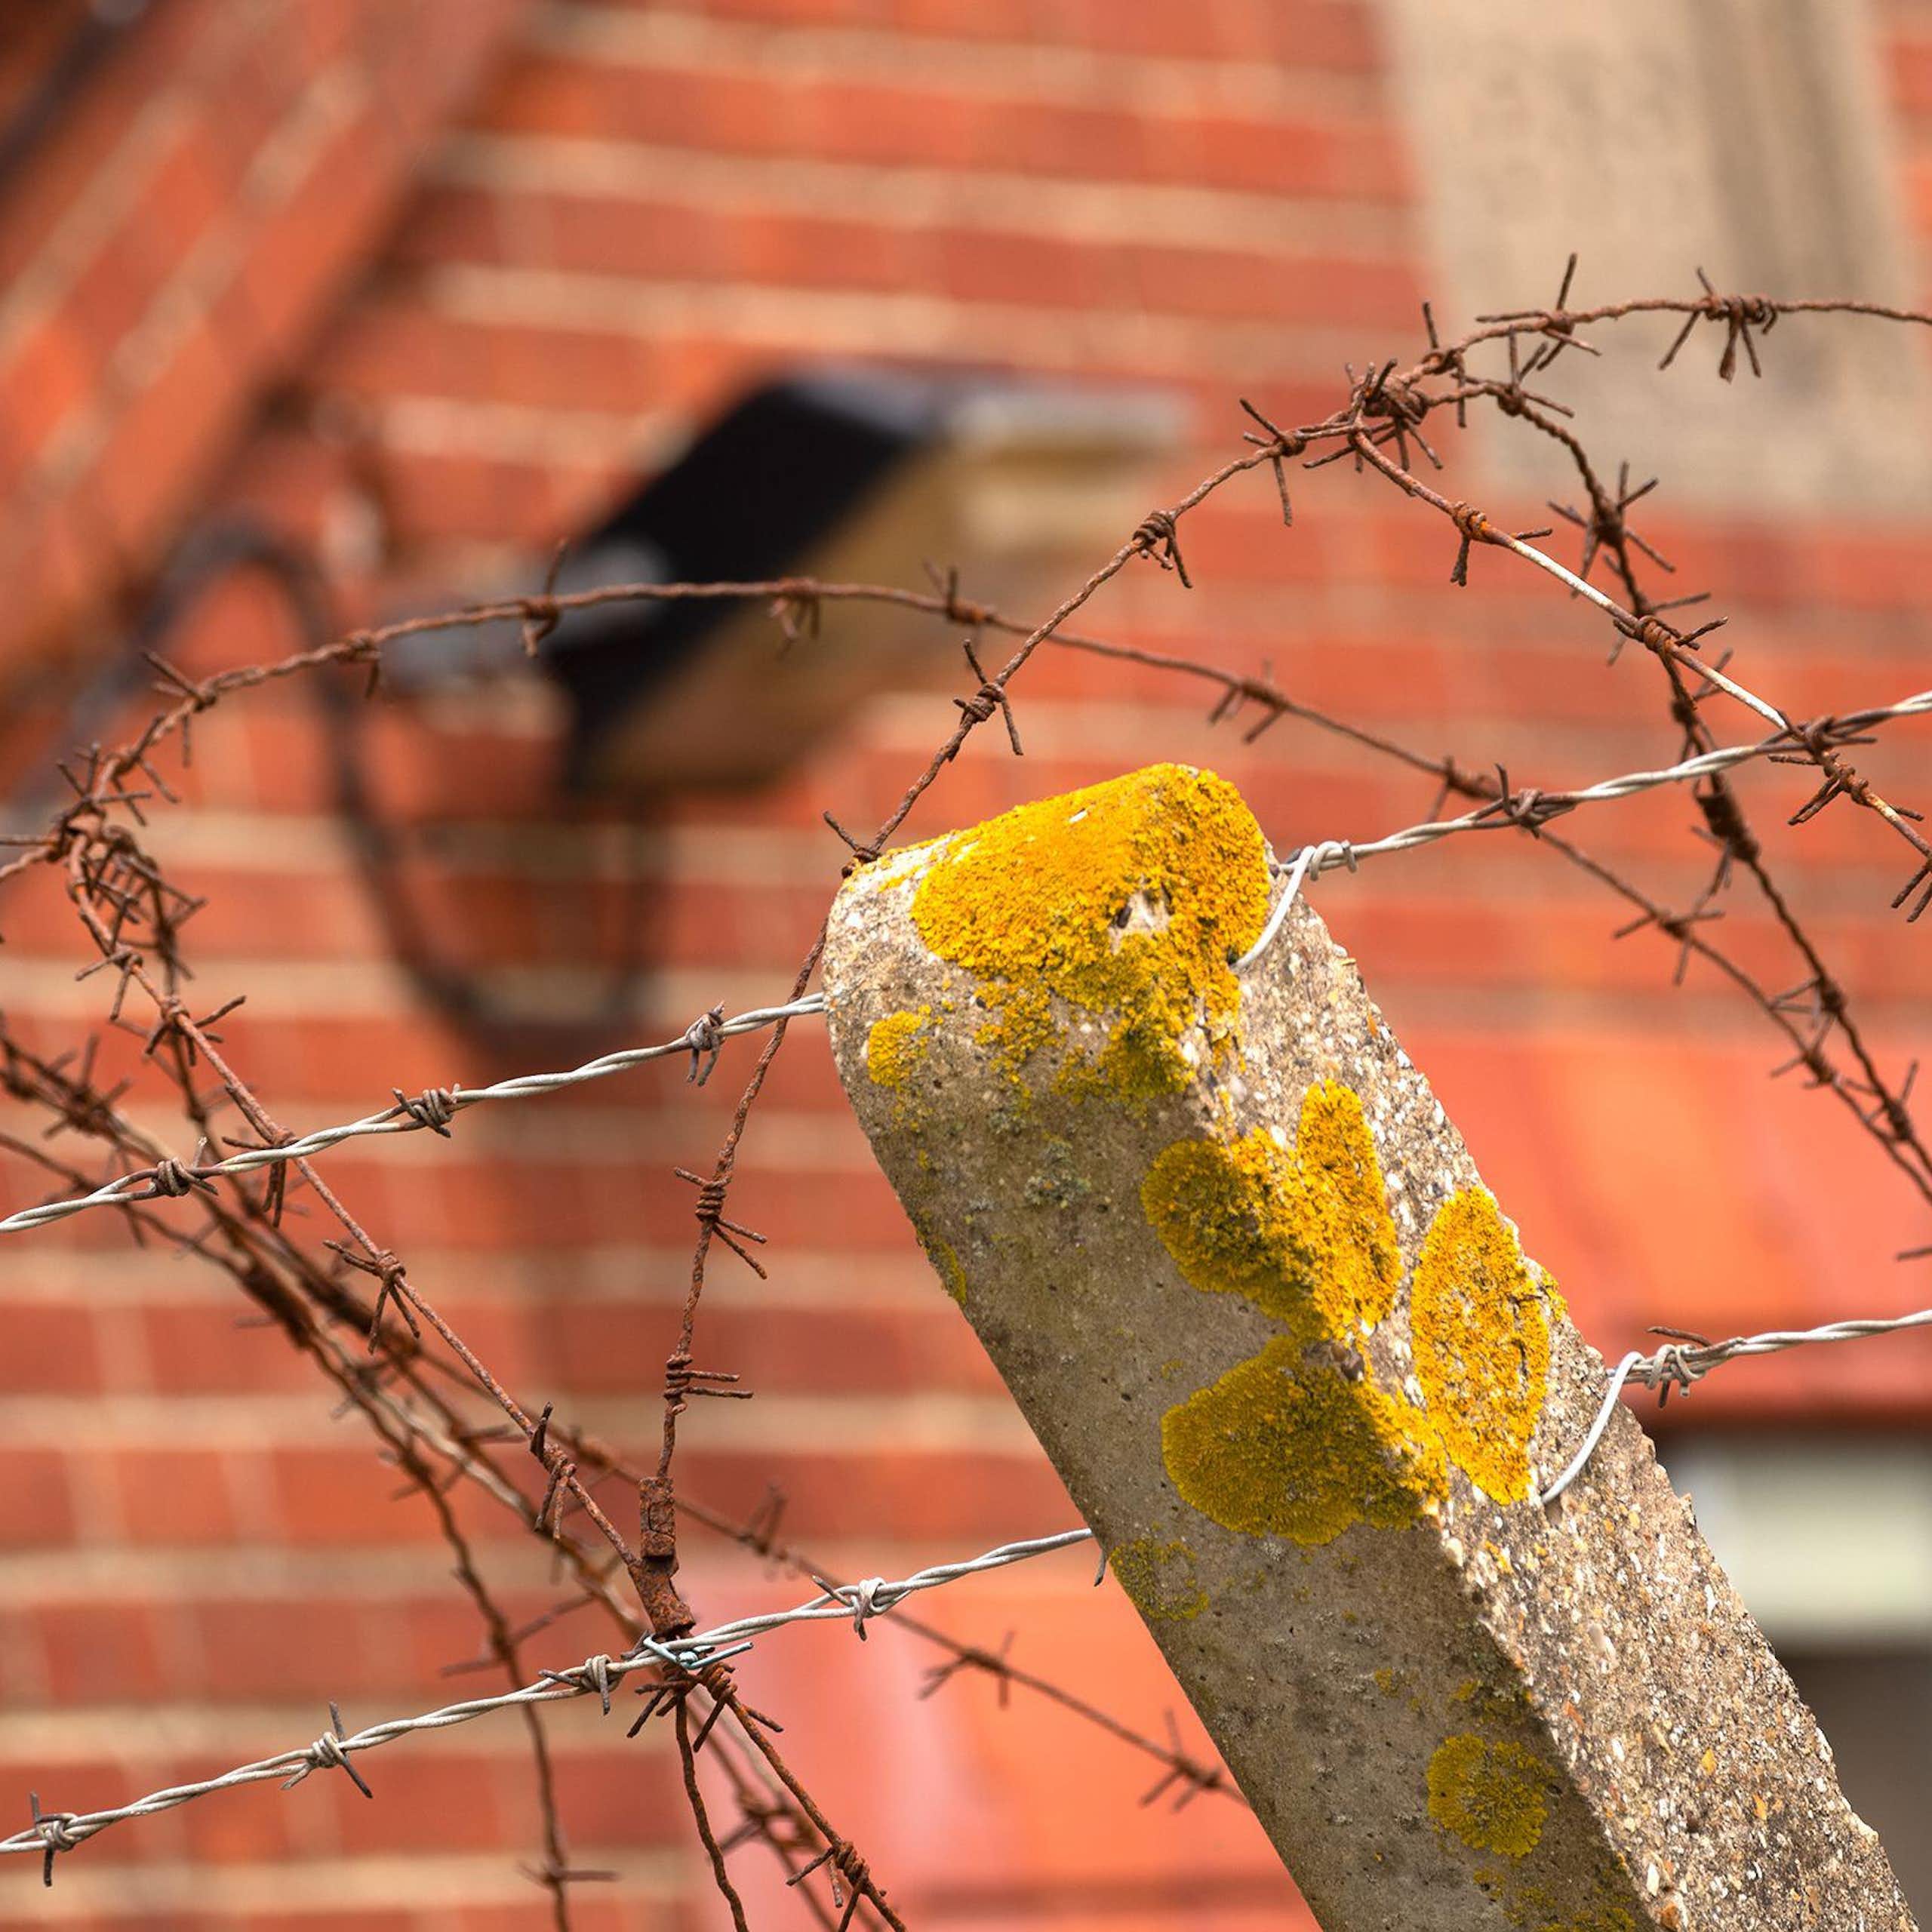 Close up of barbed wire fencing in front of a red brick barracks building